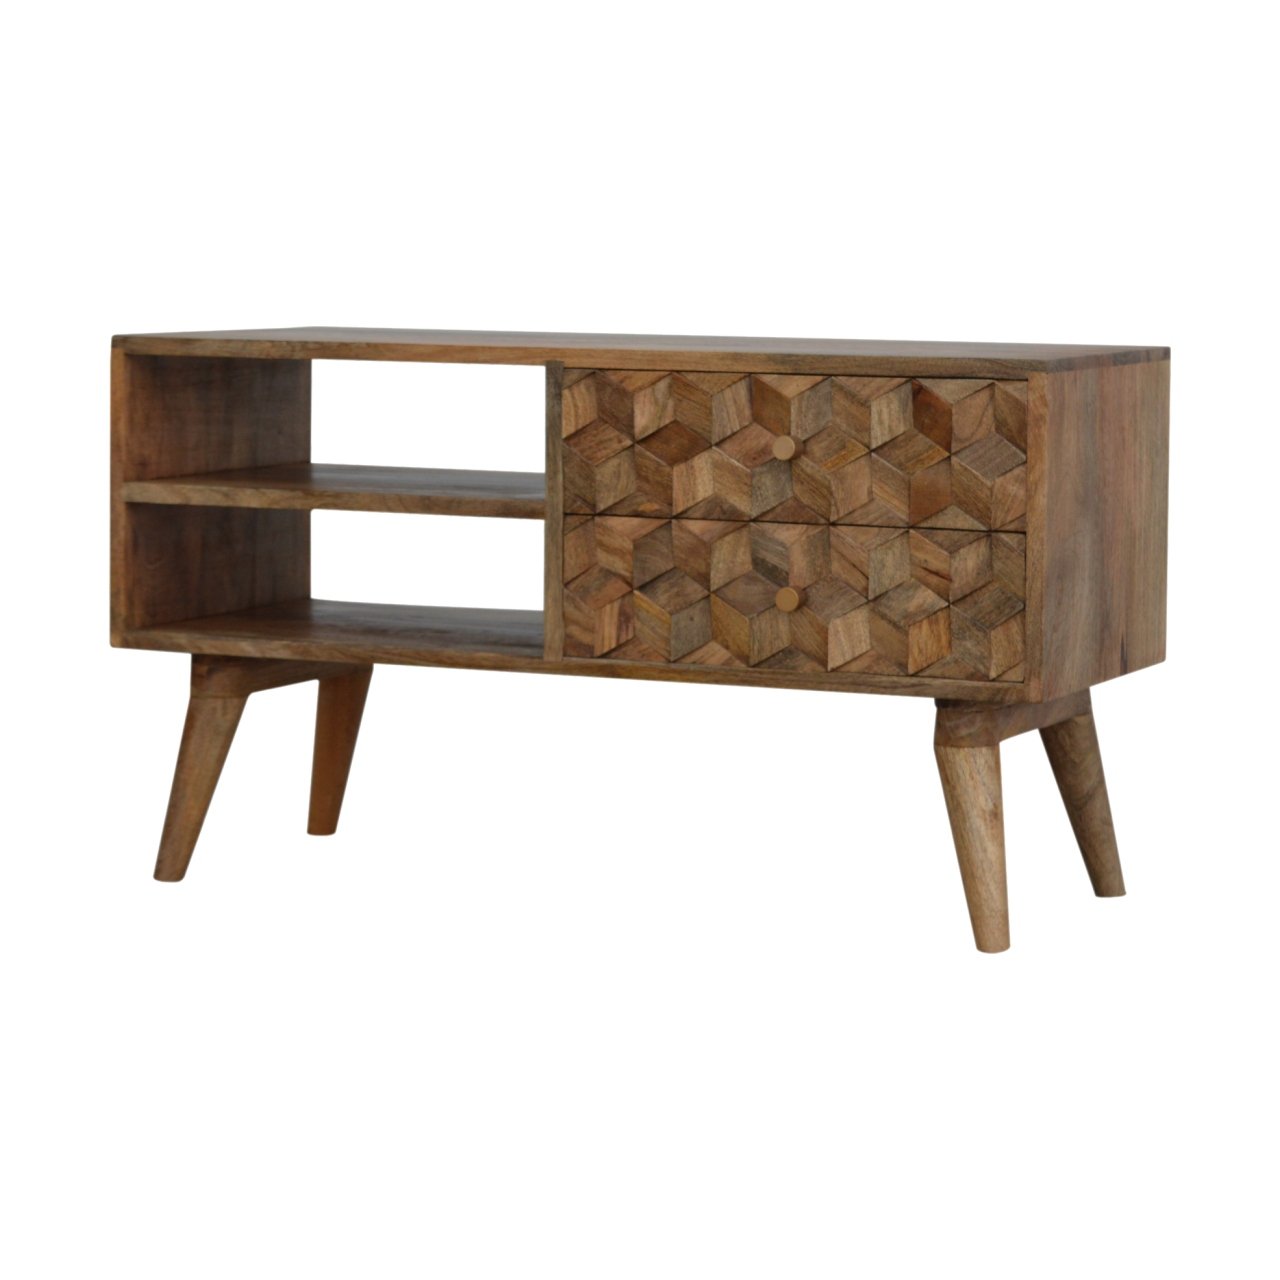 Carved Cube Media Unit